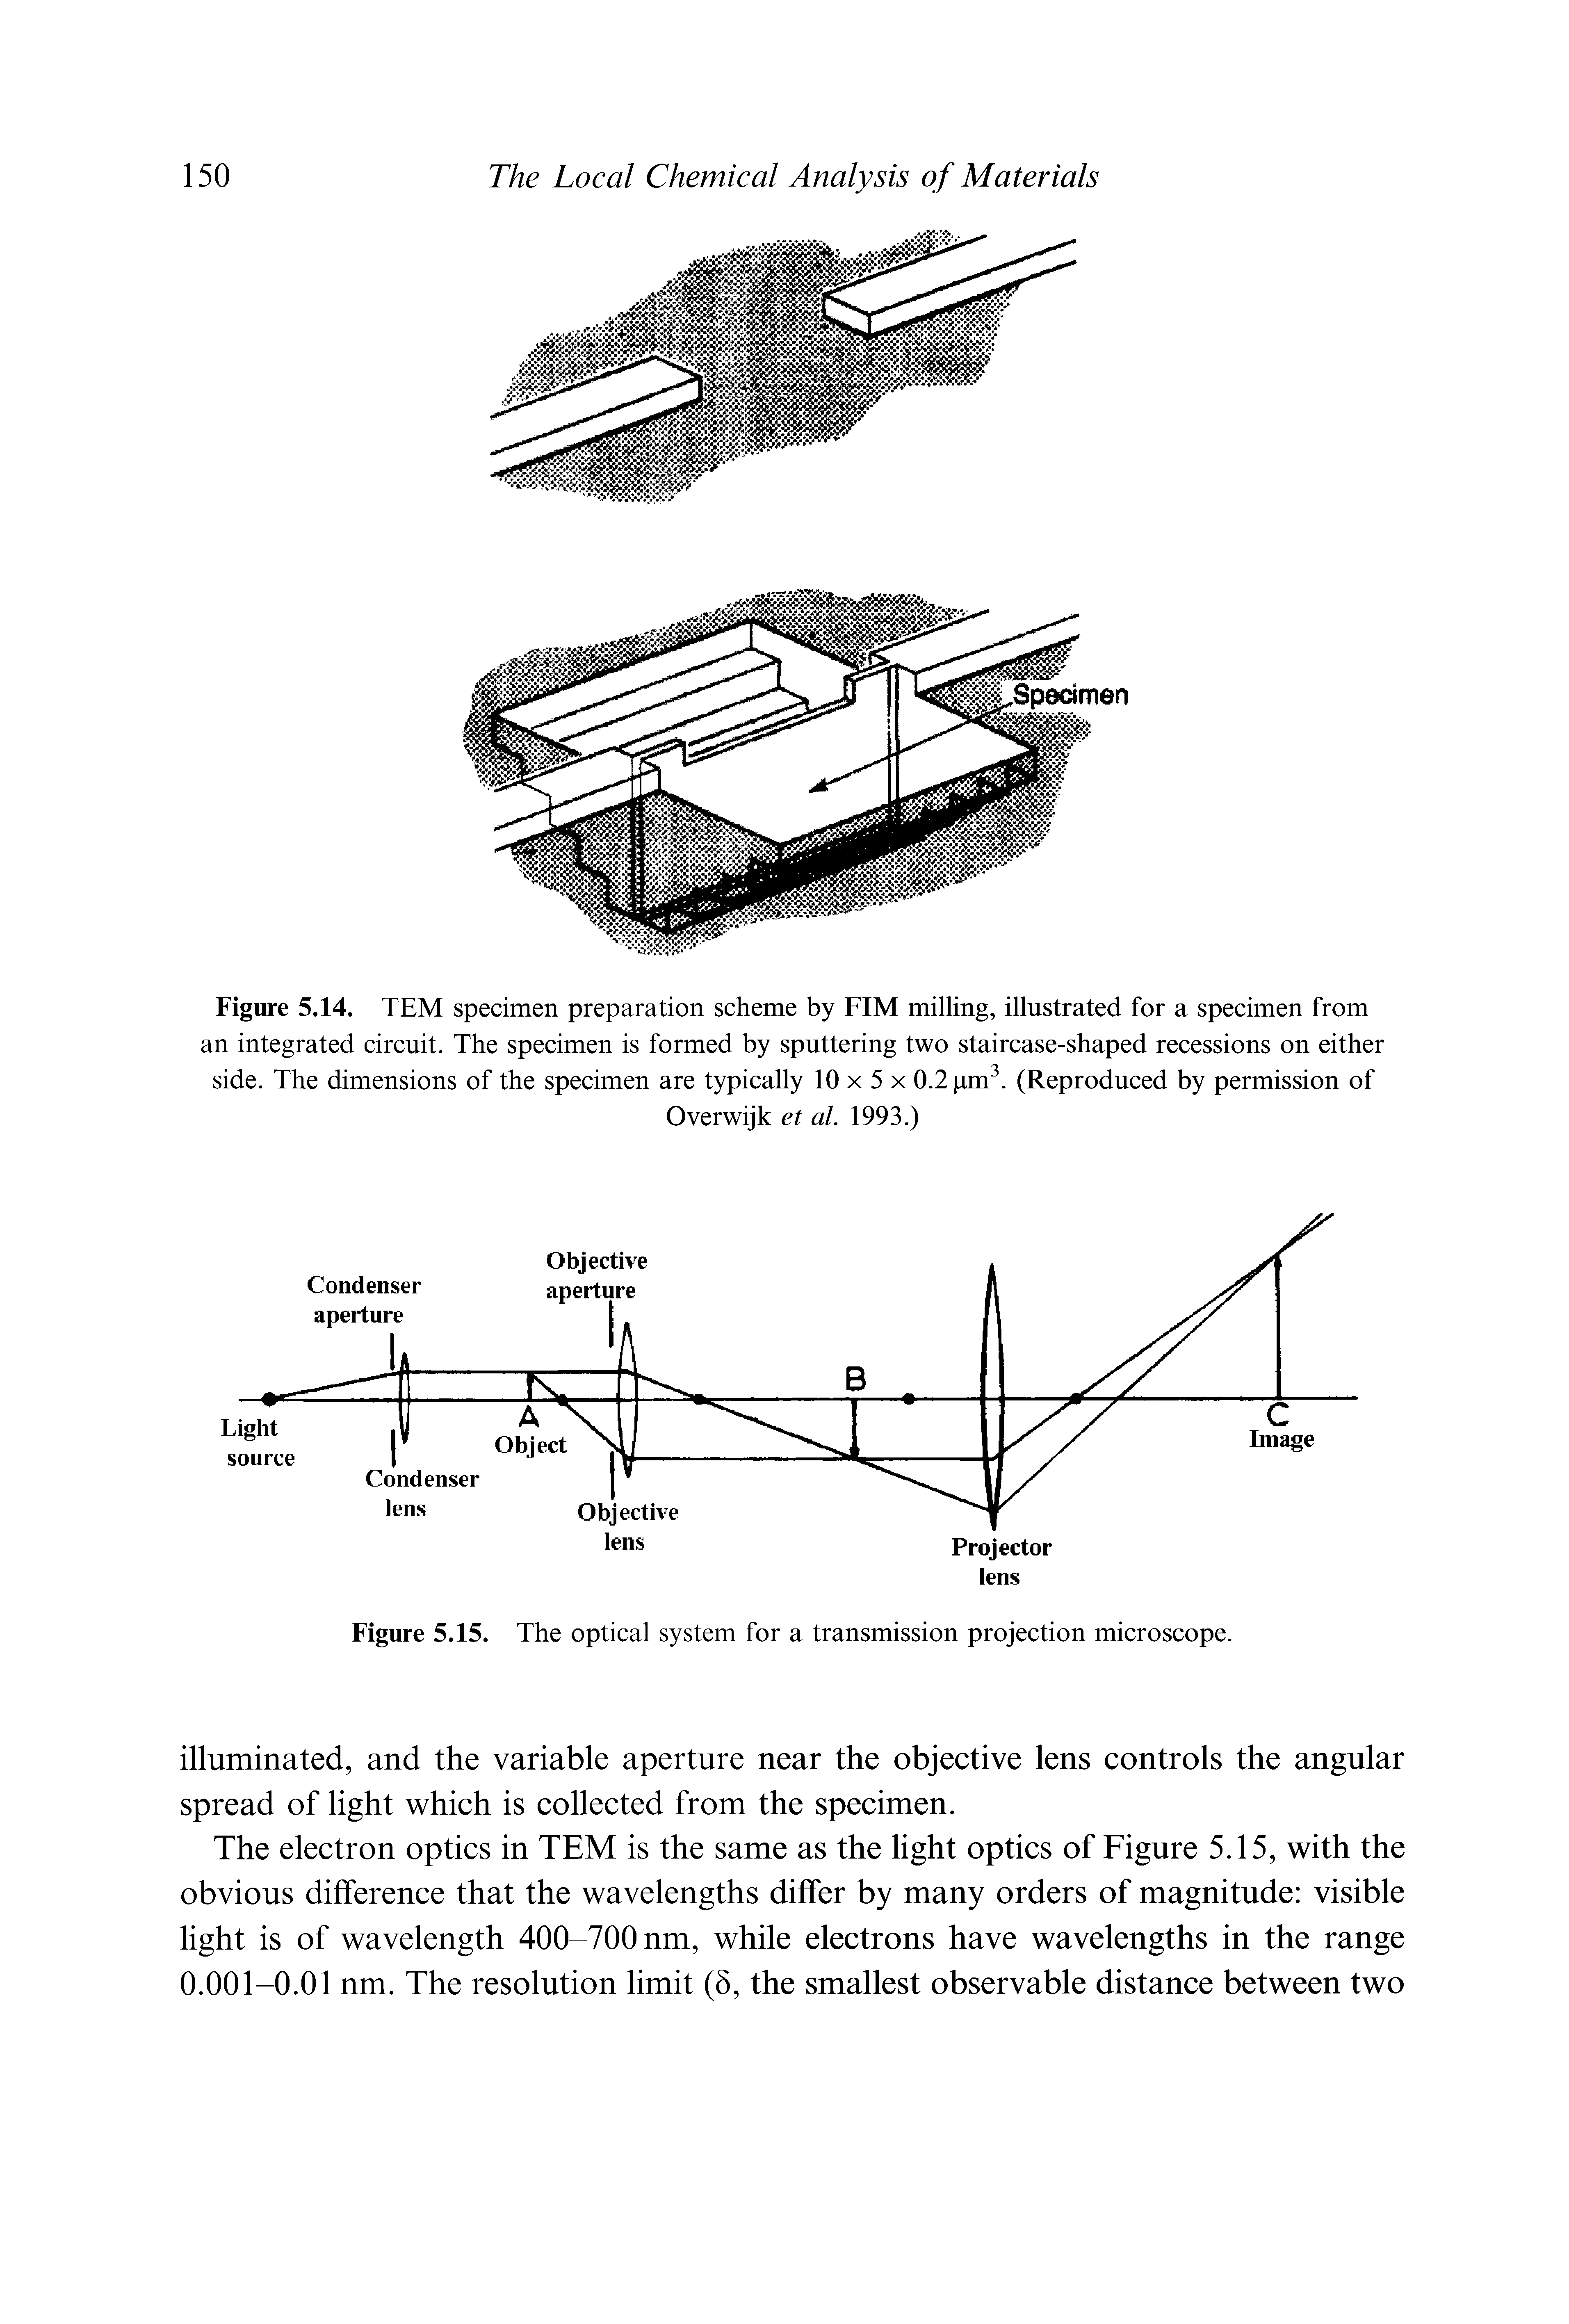 Figure 5.14. TEM specimen preparation scheme by FIM milling, illustrated for a specimen from an integrated circuit. The specimen is formed by sputtering two staircase-shaped recessions on either side. The dimensions of the specimen are typically 10 x 5 x 0.2 pm3. (Reproduced by permission of...